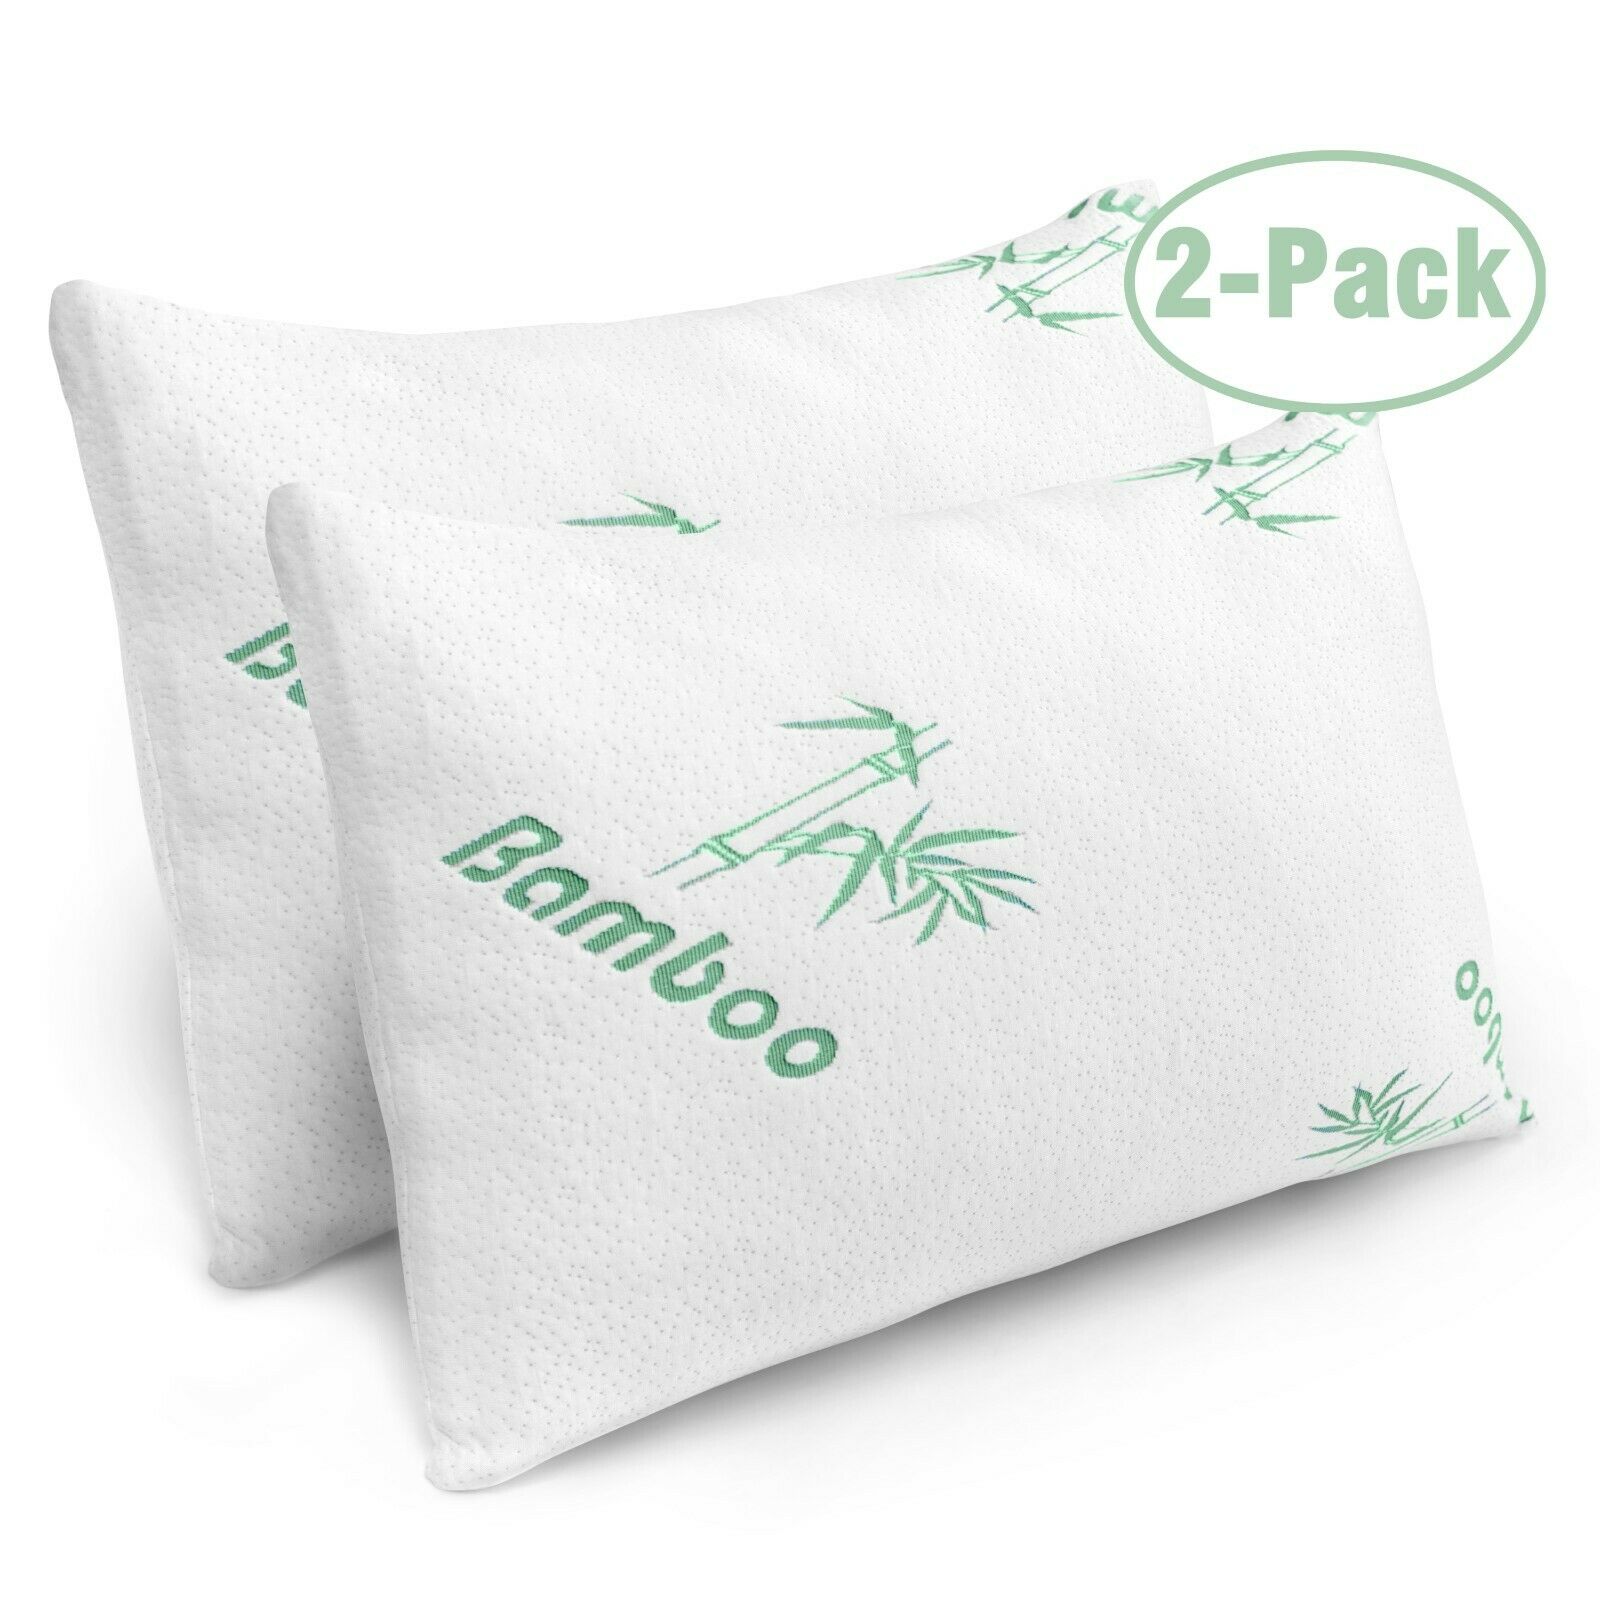 Plixio Bamboo Shredded Memory Foam Pillow With Hypoallergenic Cover 2 Pack Queen